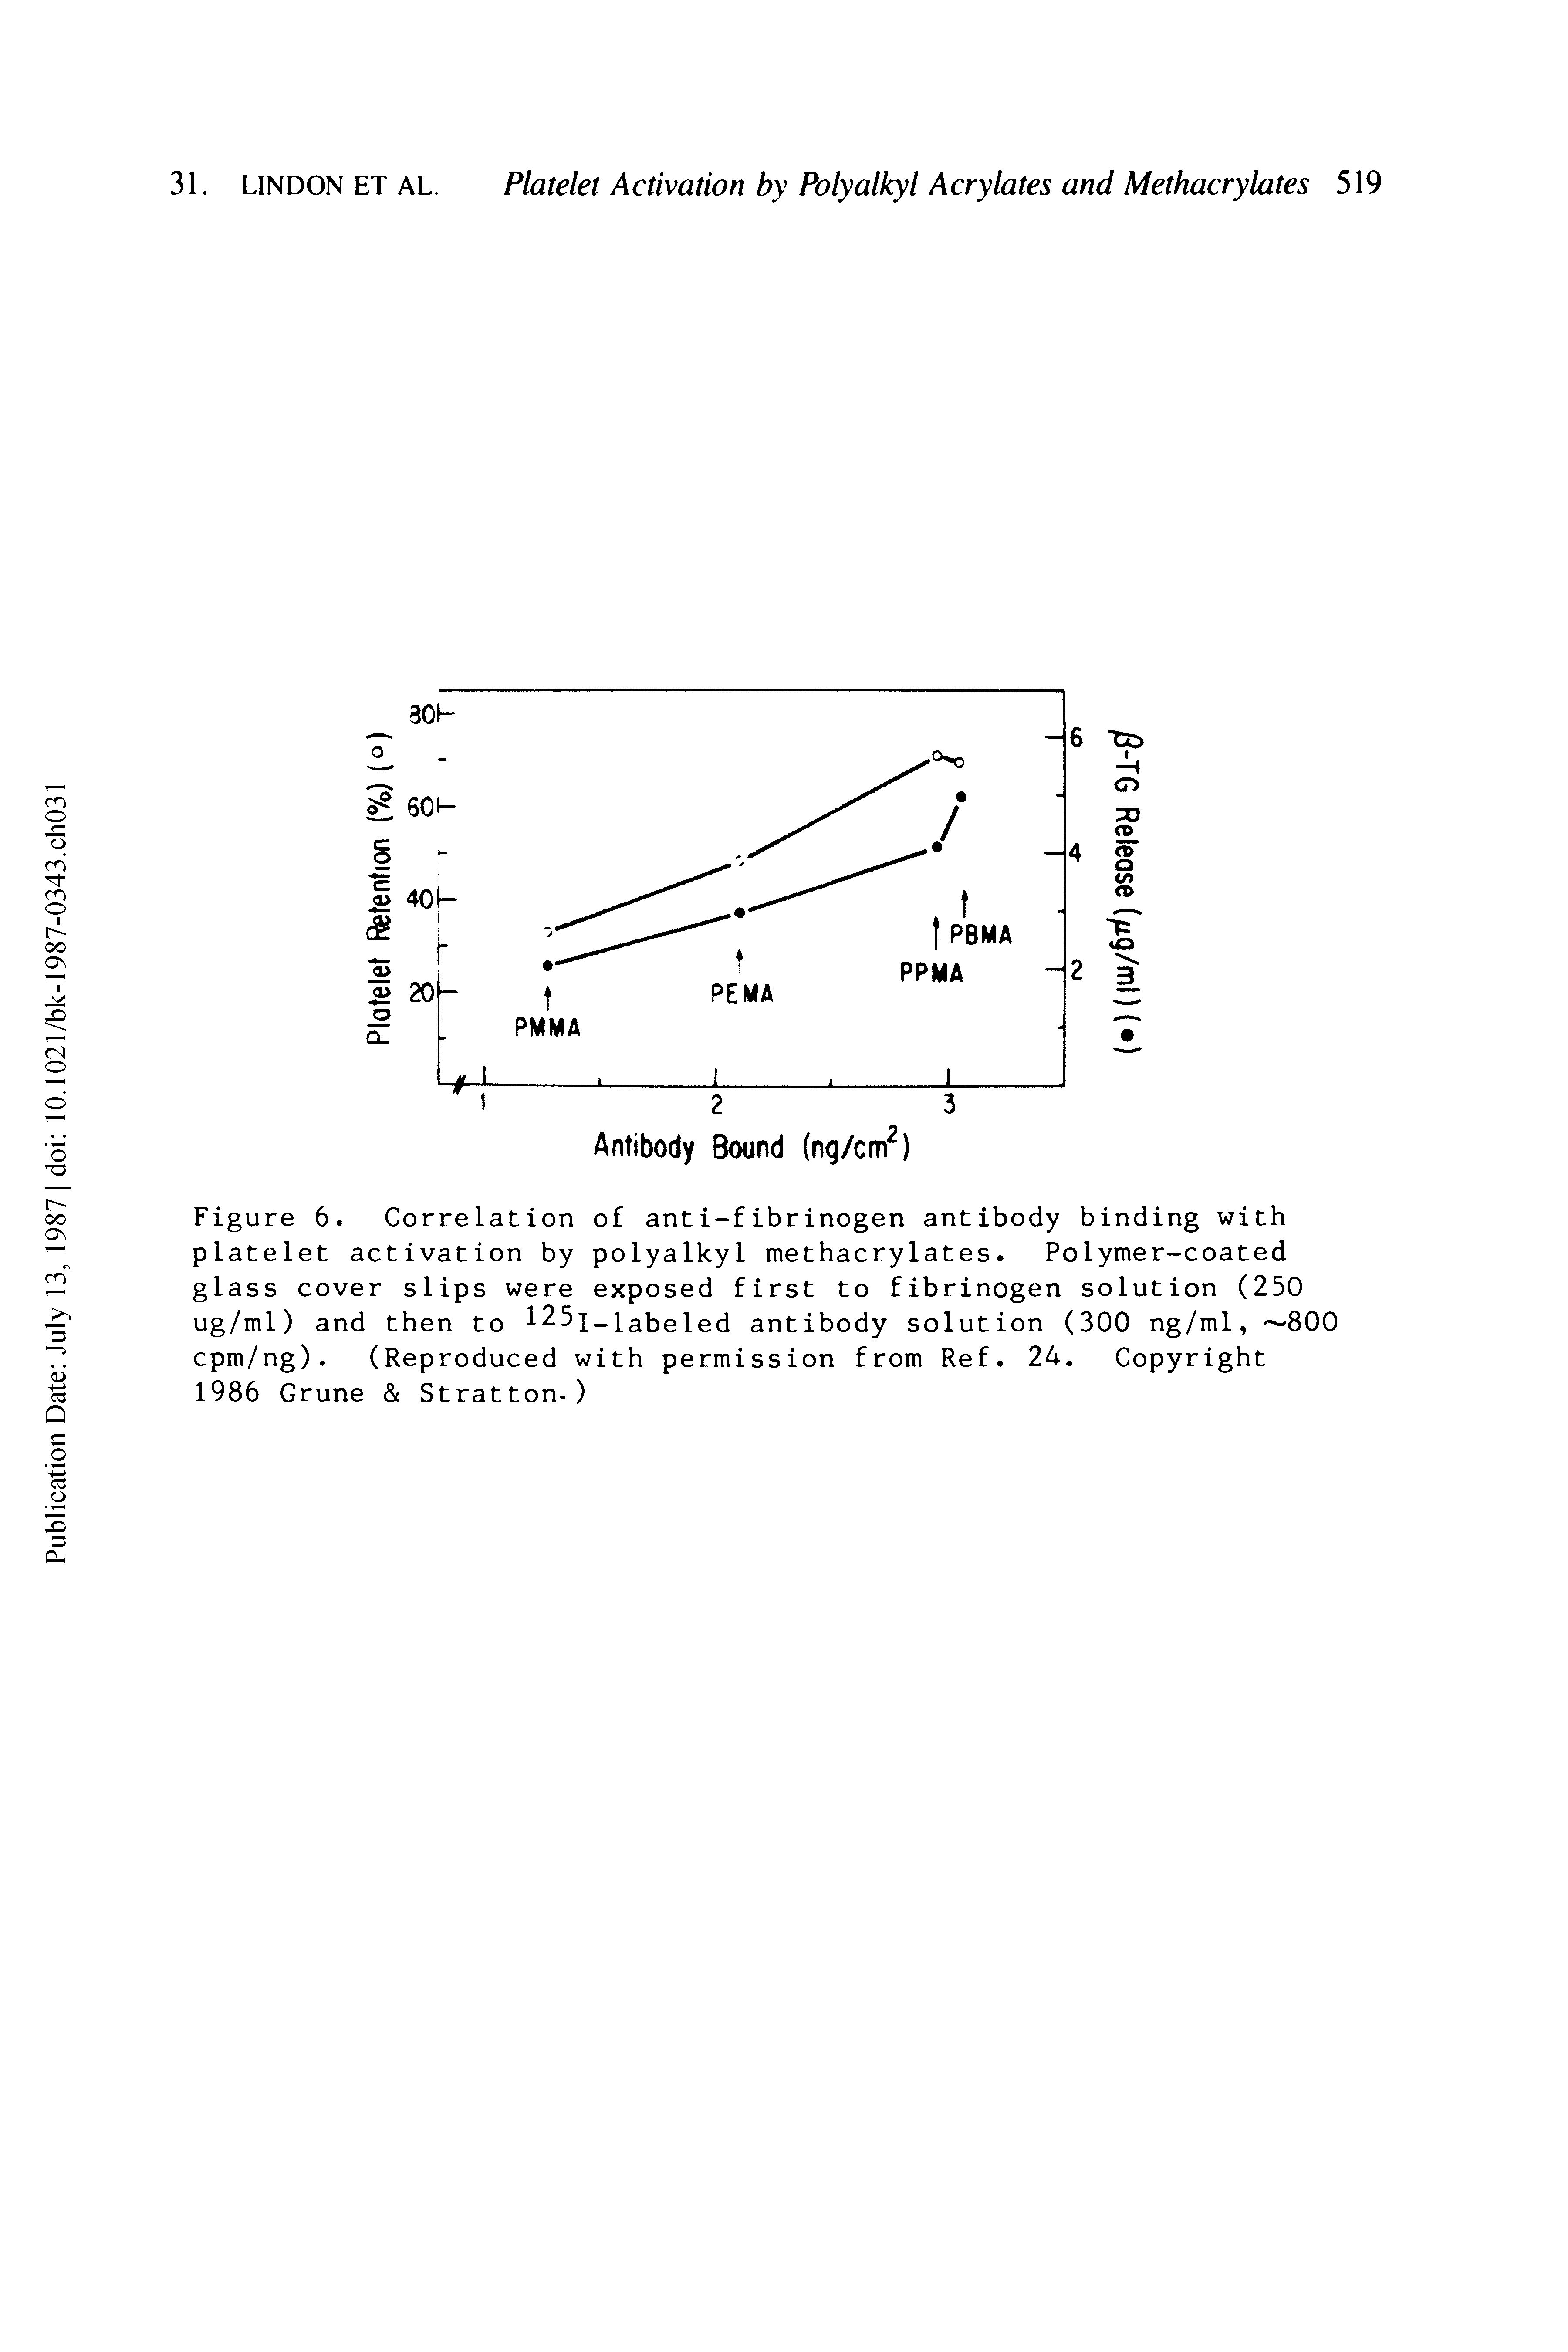 Figure 6. Correlation of anti-fibrinogen antibody binding with platelet activation by polyalkyl methacrylates. Polymer-coated glass cover slips were exposed first to fibrinogen solution (250 ug/ml) and then to 1 25x-labeled antibody solution (300 ng/ml, 800 cpm/ng). (Reproduced with permission from Ref. 24. Copyright 1986 Grune Stratton.)...